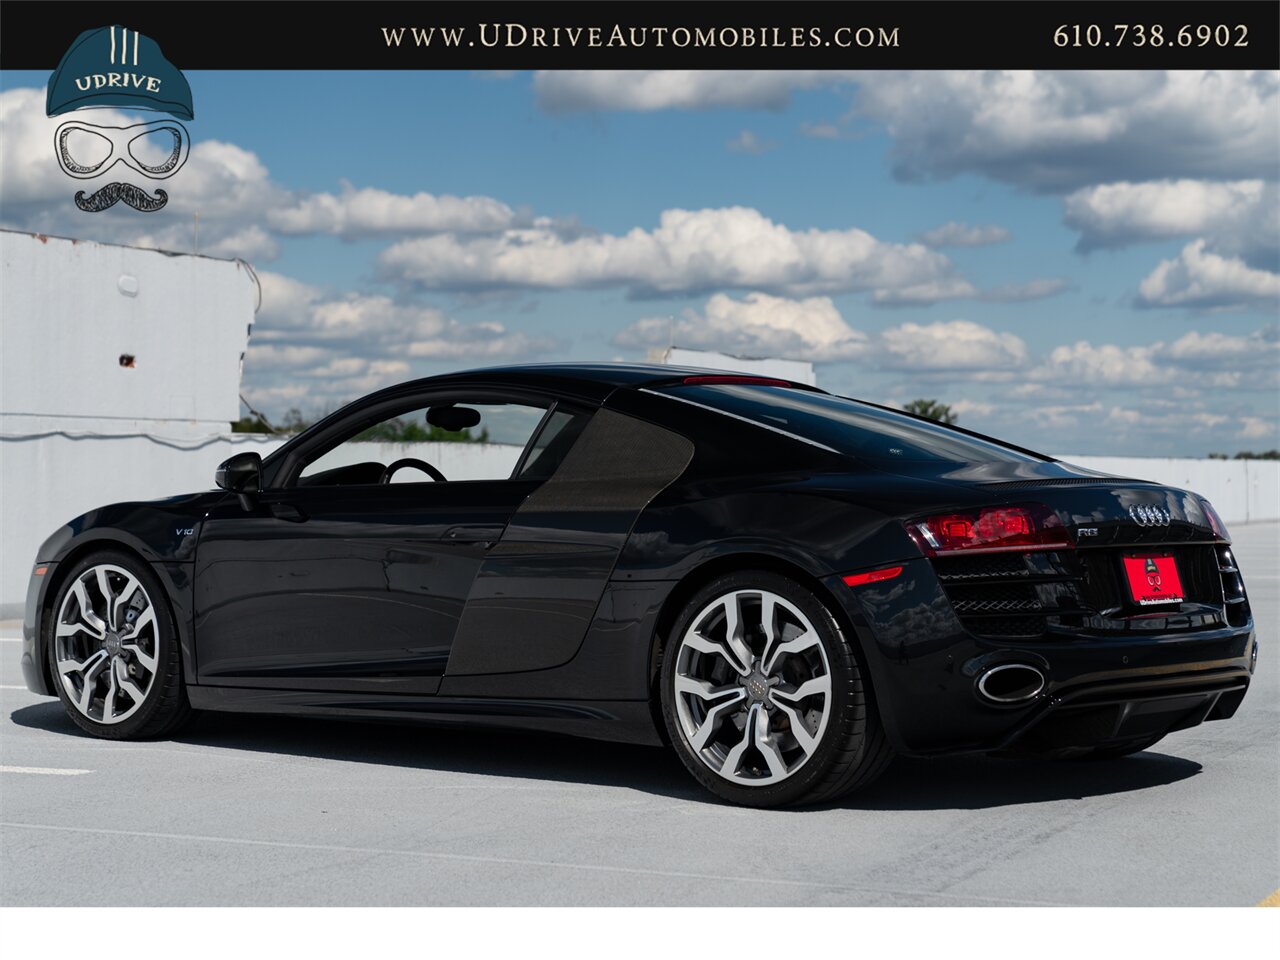 2011 Audi R8 5.2 Quattro  V10 6 Speed Manual - Photo 23 - West Chester, PA 19382